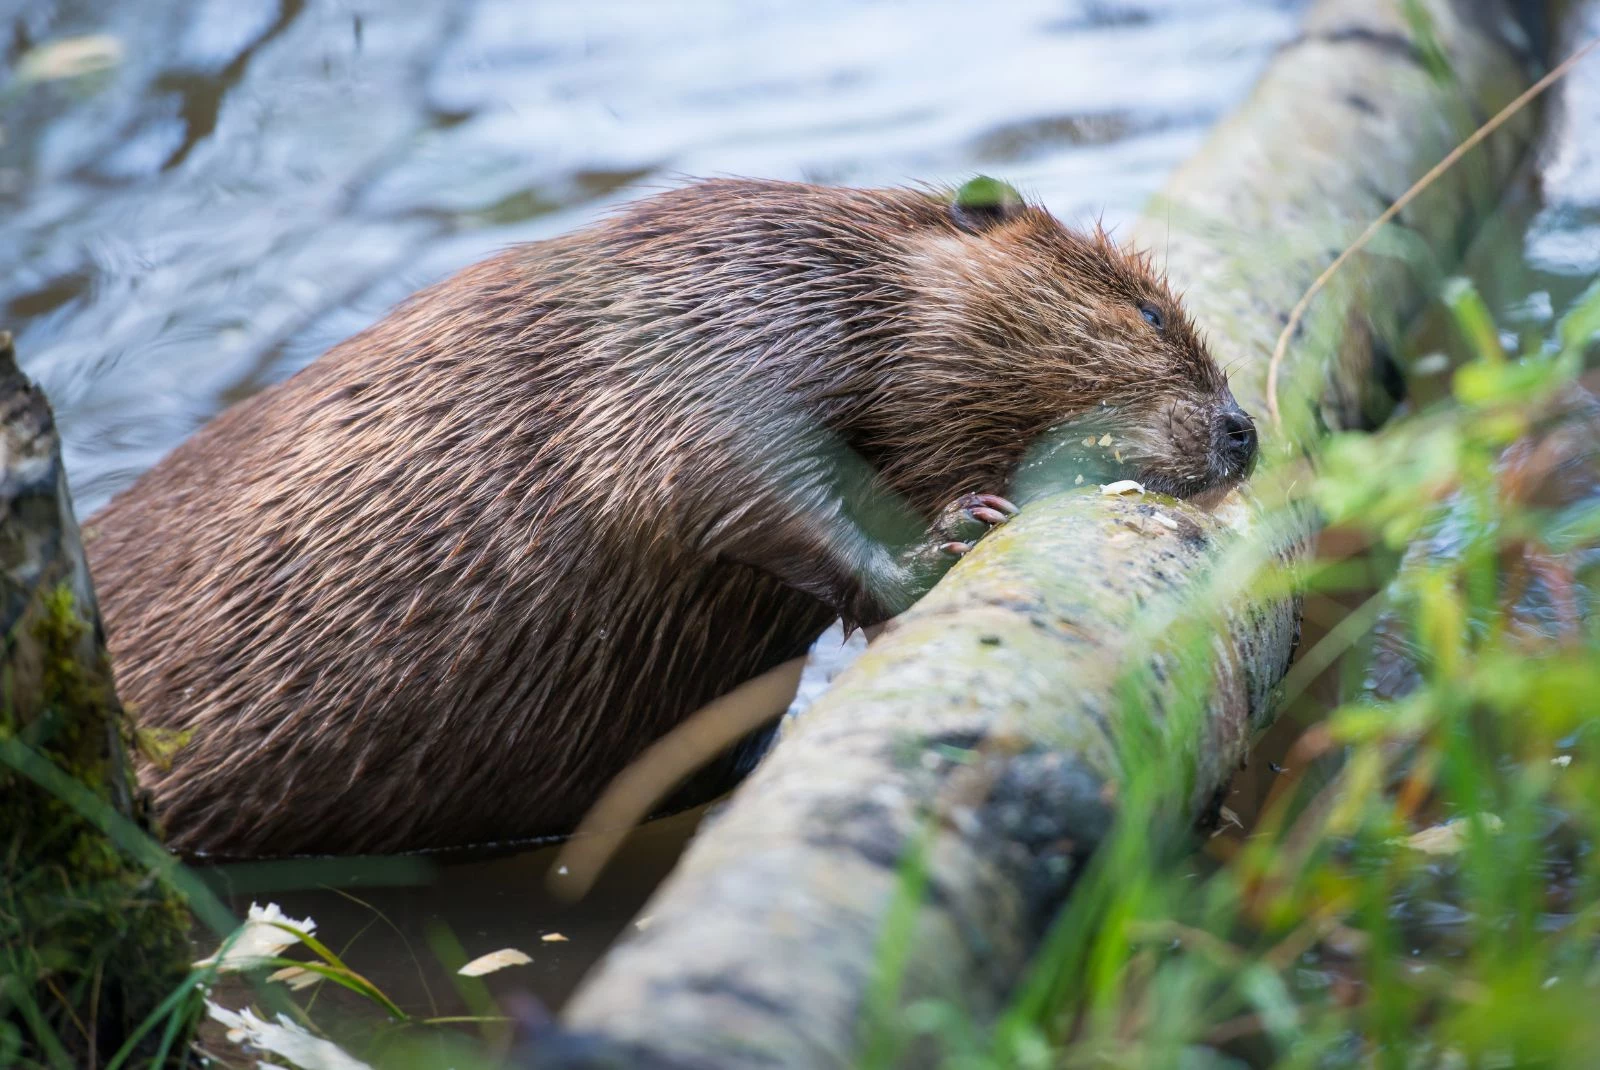 Can I Legally Blow Up A Beaver Dam In Minnesota-Getty Thinkstock